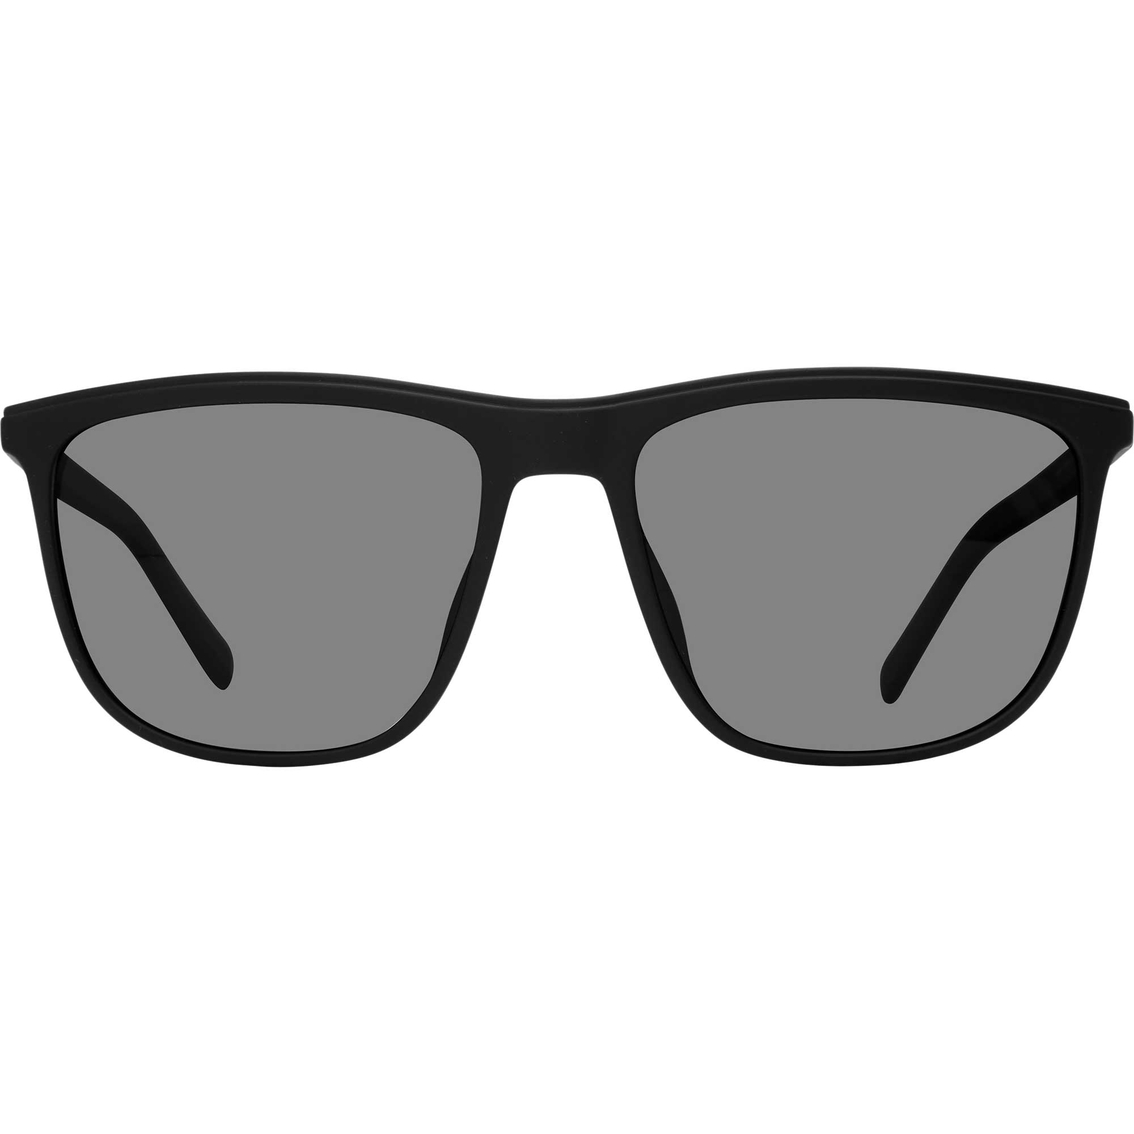 Fossil Sunglasses Mil69s 0003m9 | Sunglasses | Clothing & Accessories ...